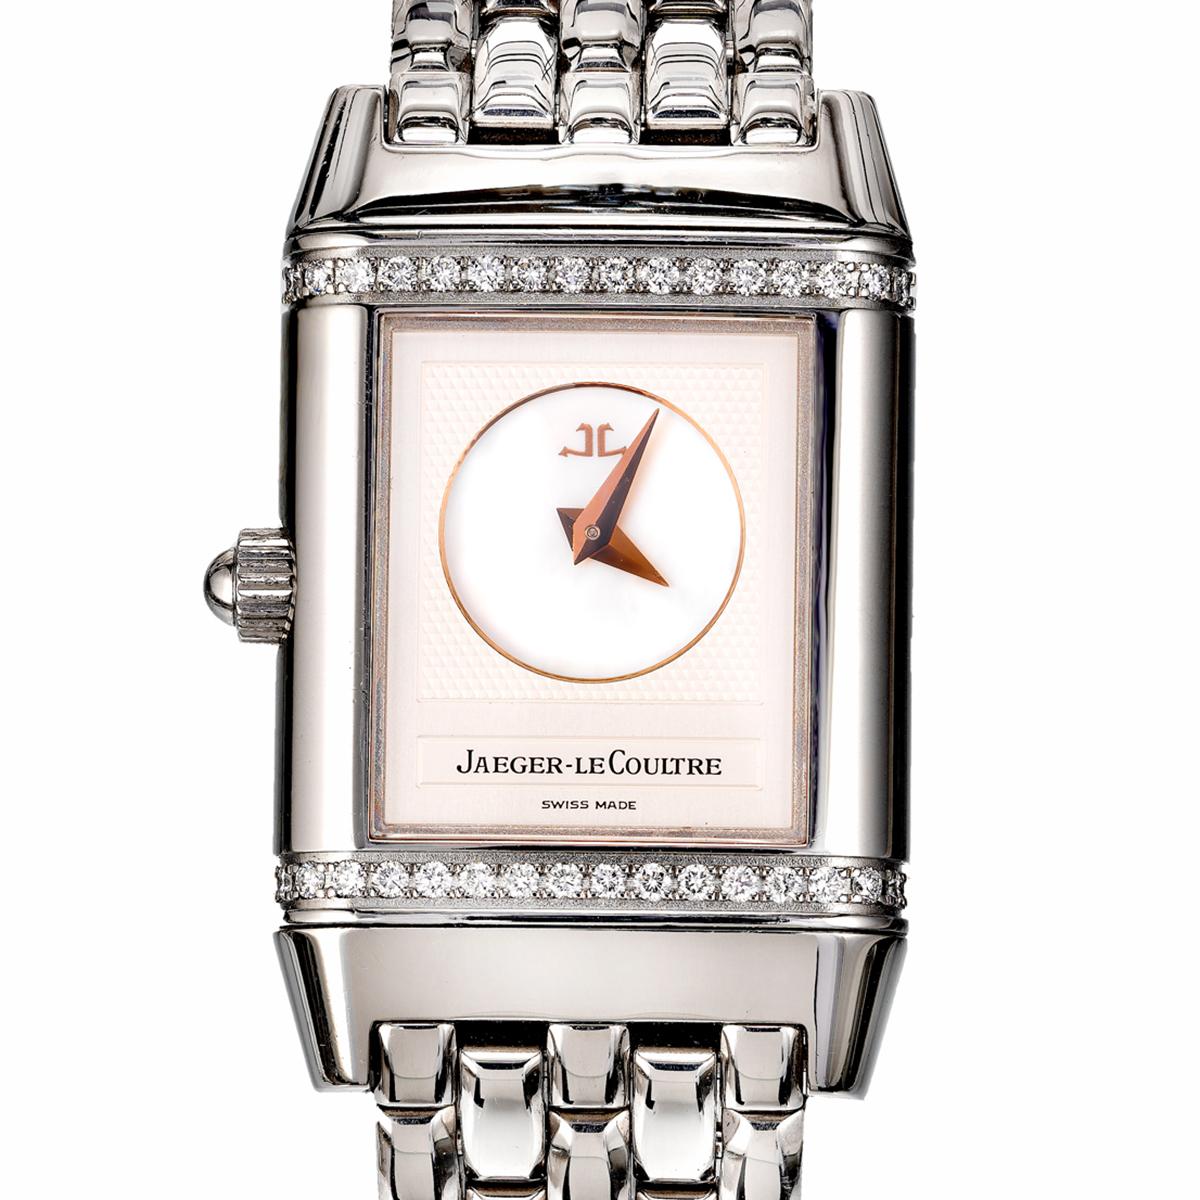 Jaeger-Le Coultre Reverso ladies stainless steel wristwatch. reference 266.8.44. White dial with numerals on one side and a white dial with a circle mother of pearl sub-dial at the center on the reverse side, a stainless steel 21mm case with diamond